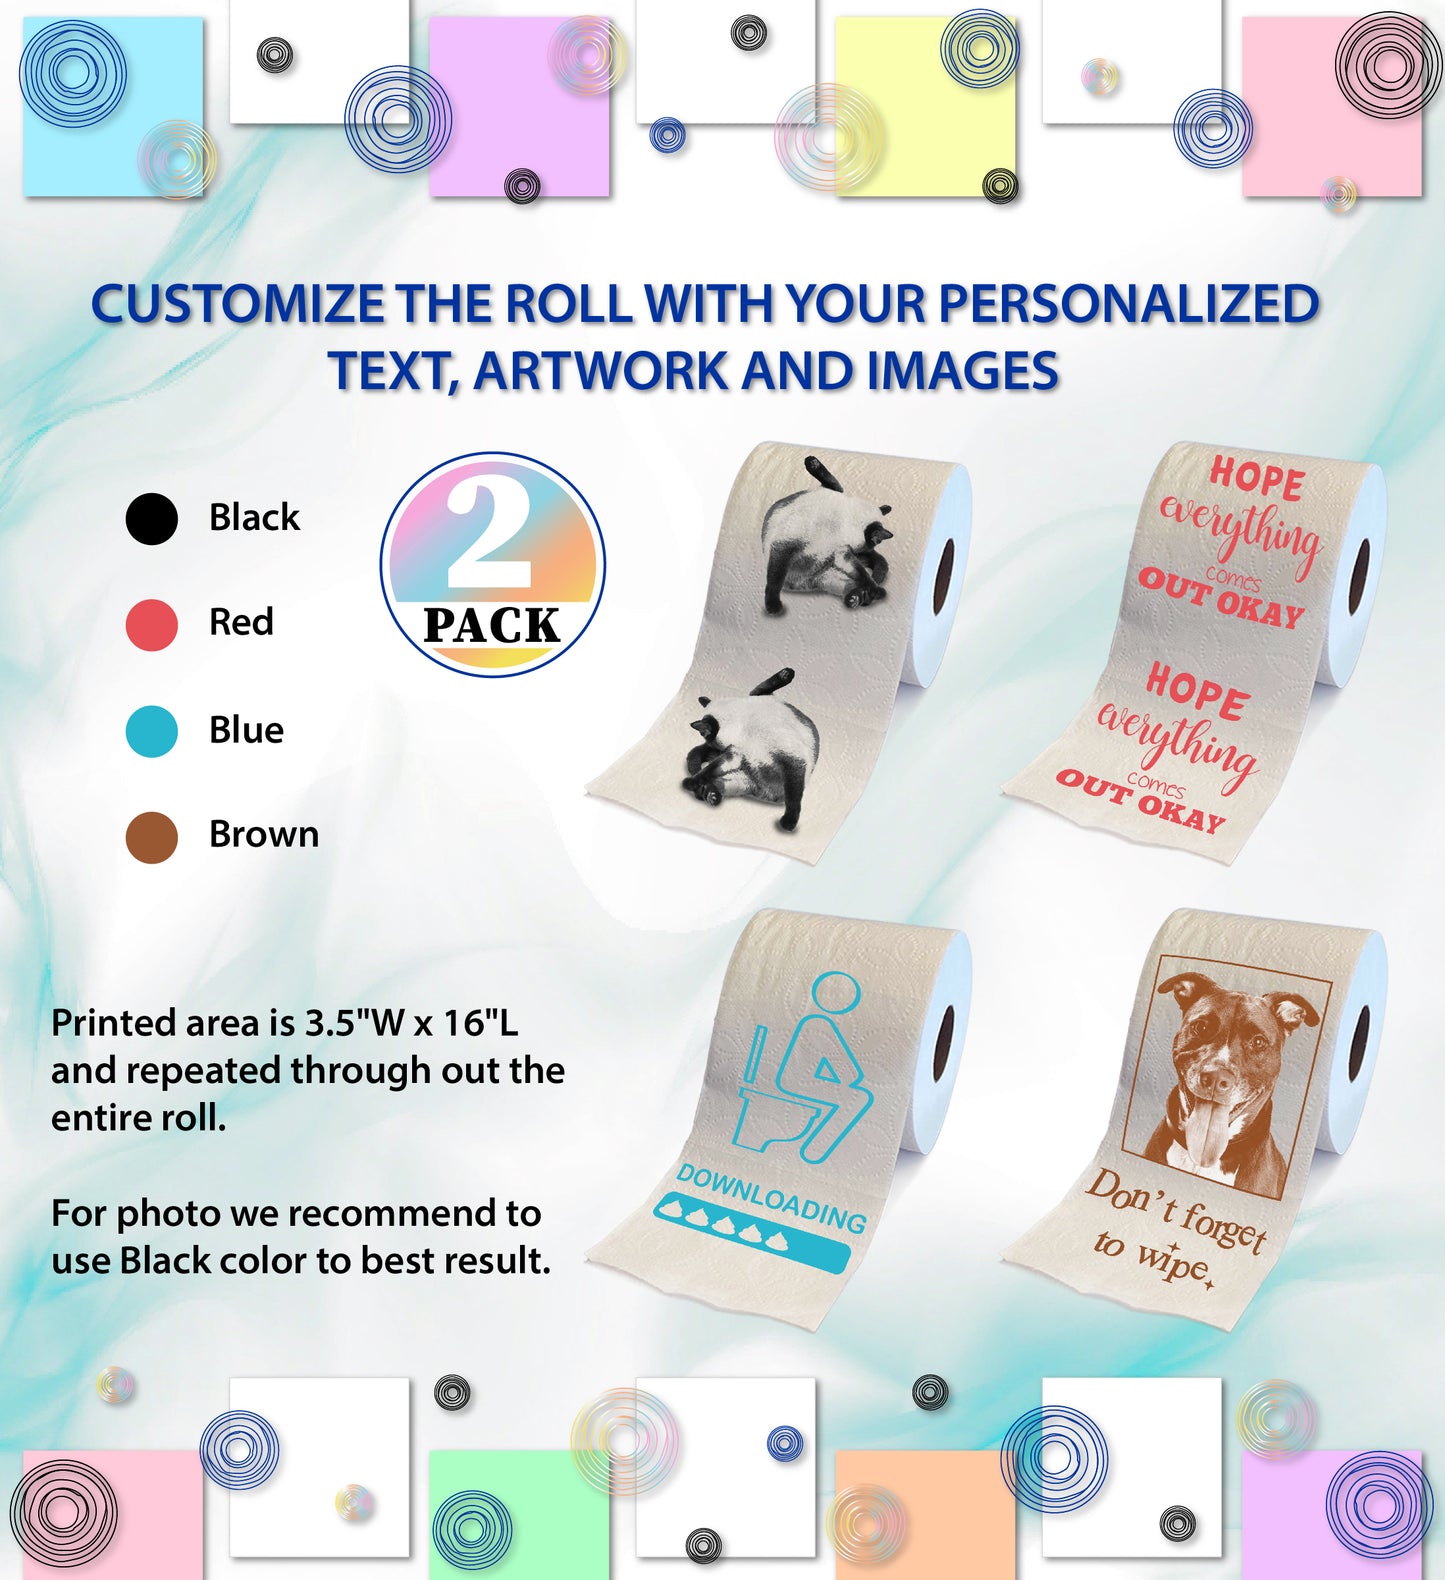 Printed TP Wholesale Toilet Paper Roll Gag Gift Decor in 1 Color - 500 sheets (Individually Shrink Wrapped - No Gift Box)